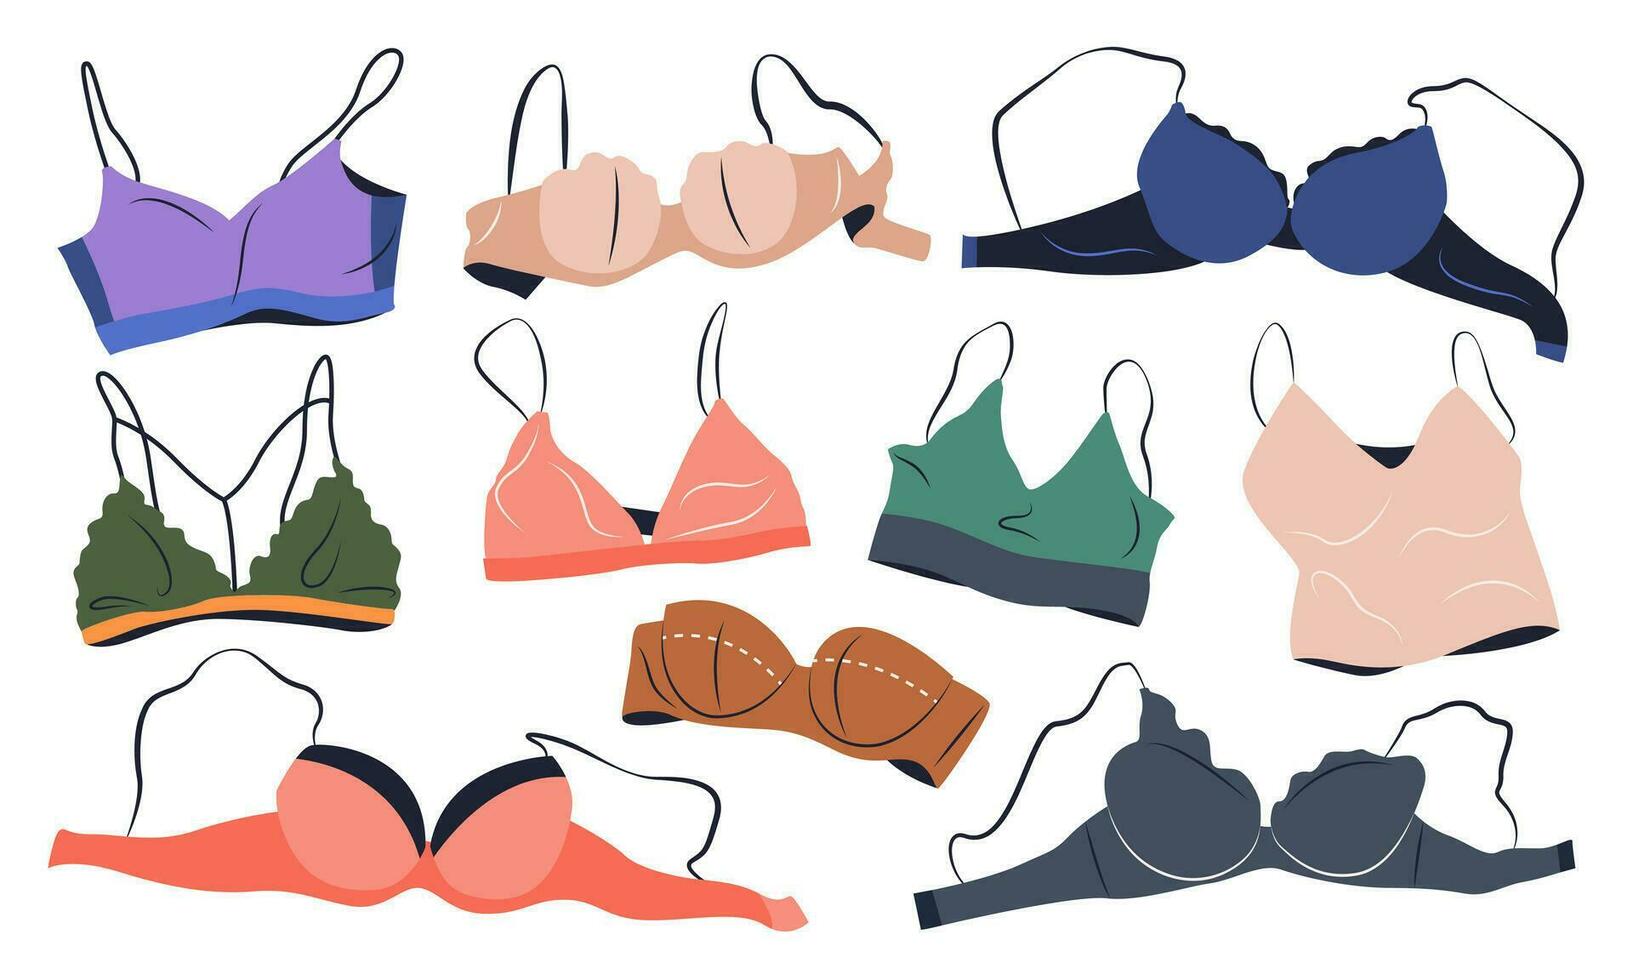 Set of bra, underwear for women. Fashion collection with various types of underclothing. isolated hand drawn cartoon vector illustrations with colorful lingerie on white background.